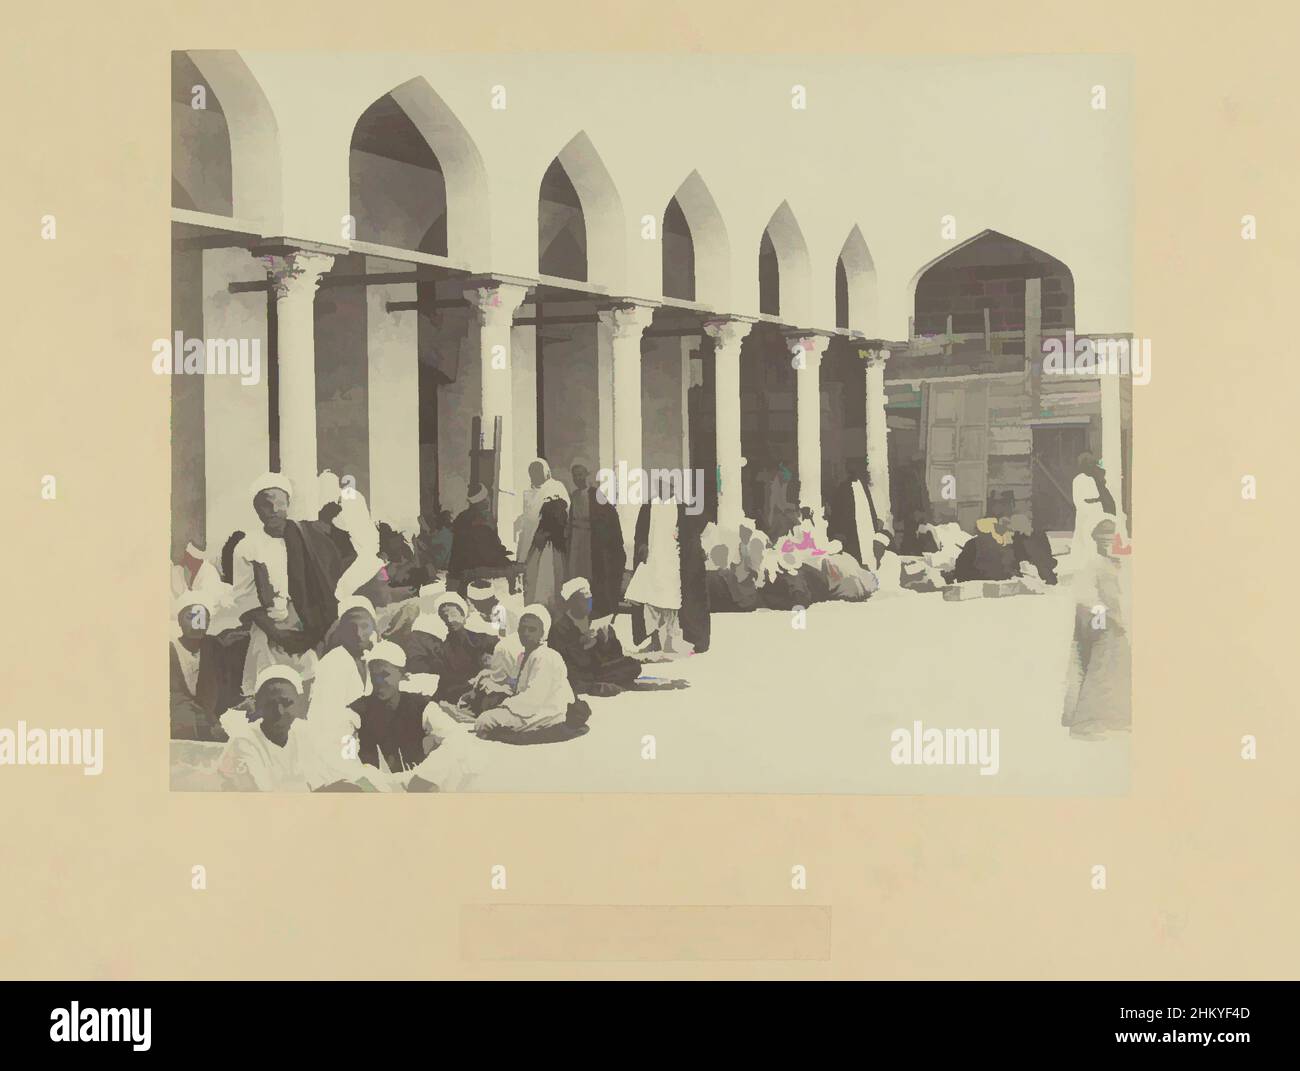 Art inspired by Students in the courtyard of the El Azhar mosque, E 29. El Azhar Mosque with student groups huddled around their professor. Cairo., Egypt (series title)23. Mosque Azhar et etudiants., The photograph is part of the series of photographs from Egypt collected by Richard, Classic works modernized by Artotop with a splash of modernity. Shapes, color and value, eye-catching visual impact on art. Emotions through freedom of artworks in a contemporary way. A timeless message pursuing a wildly creative new direction. Artists turning to the digital medium and creating the Artotop NFT Stock Photo